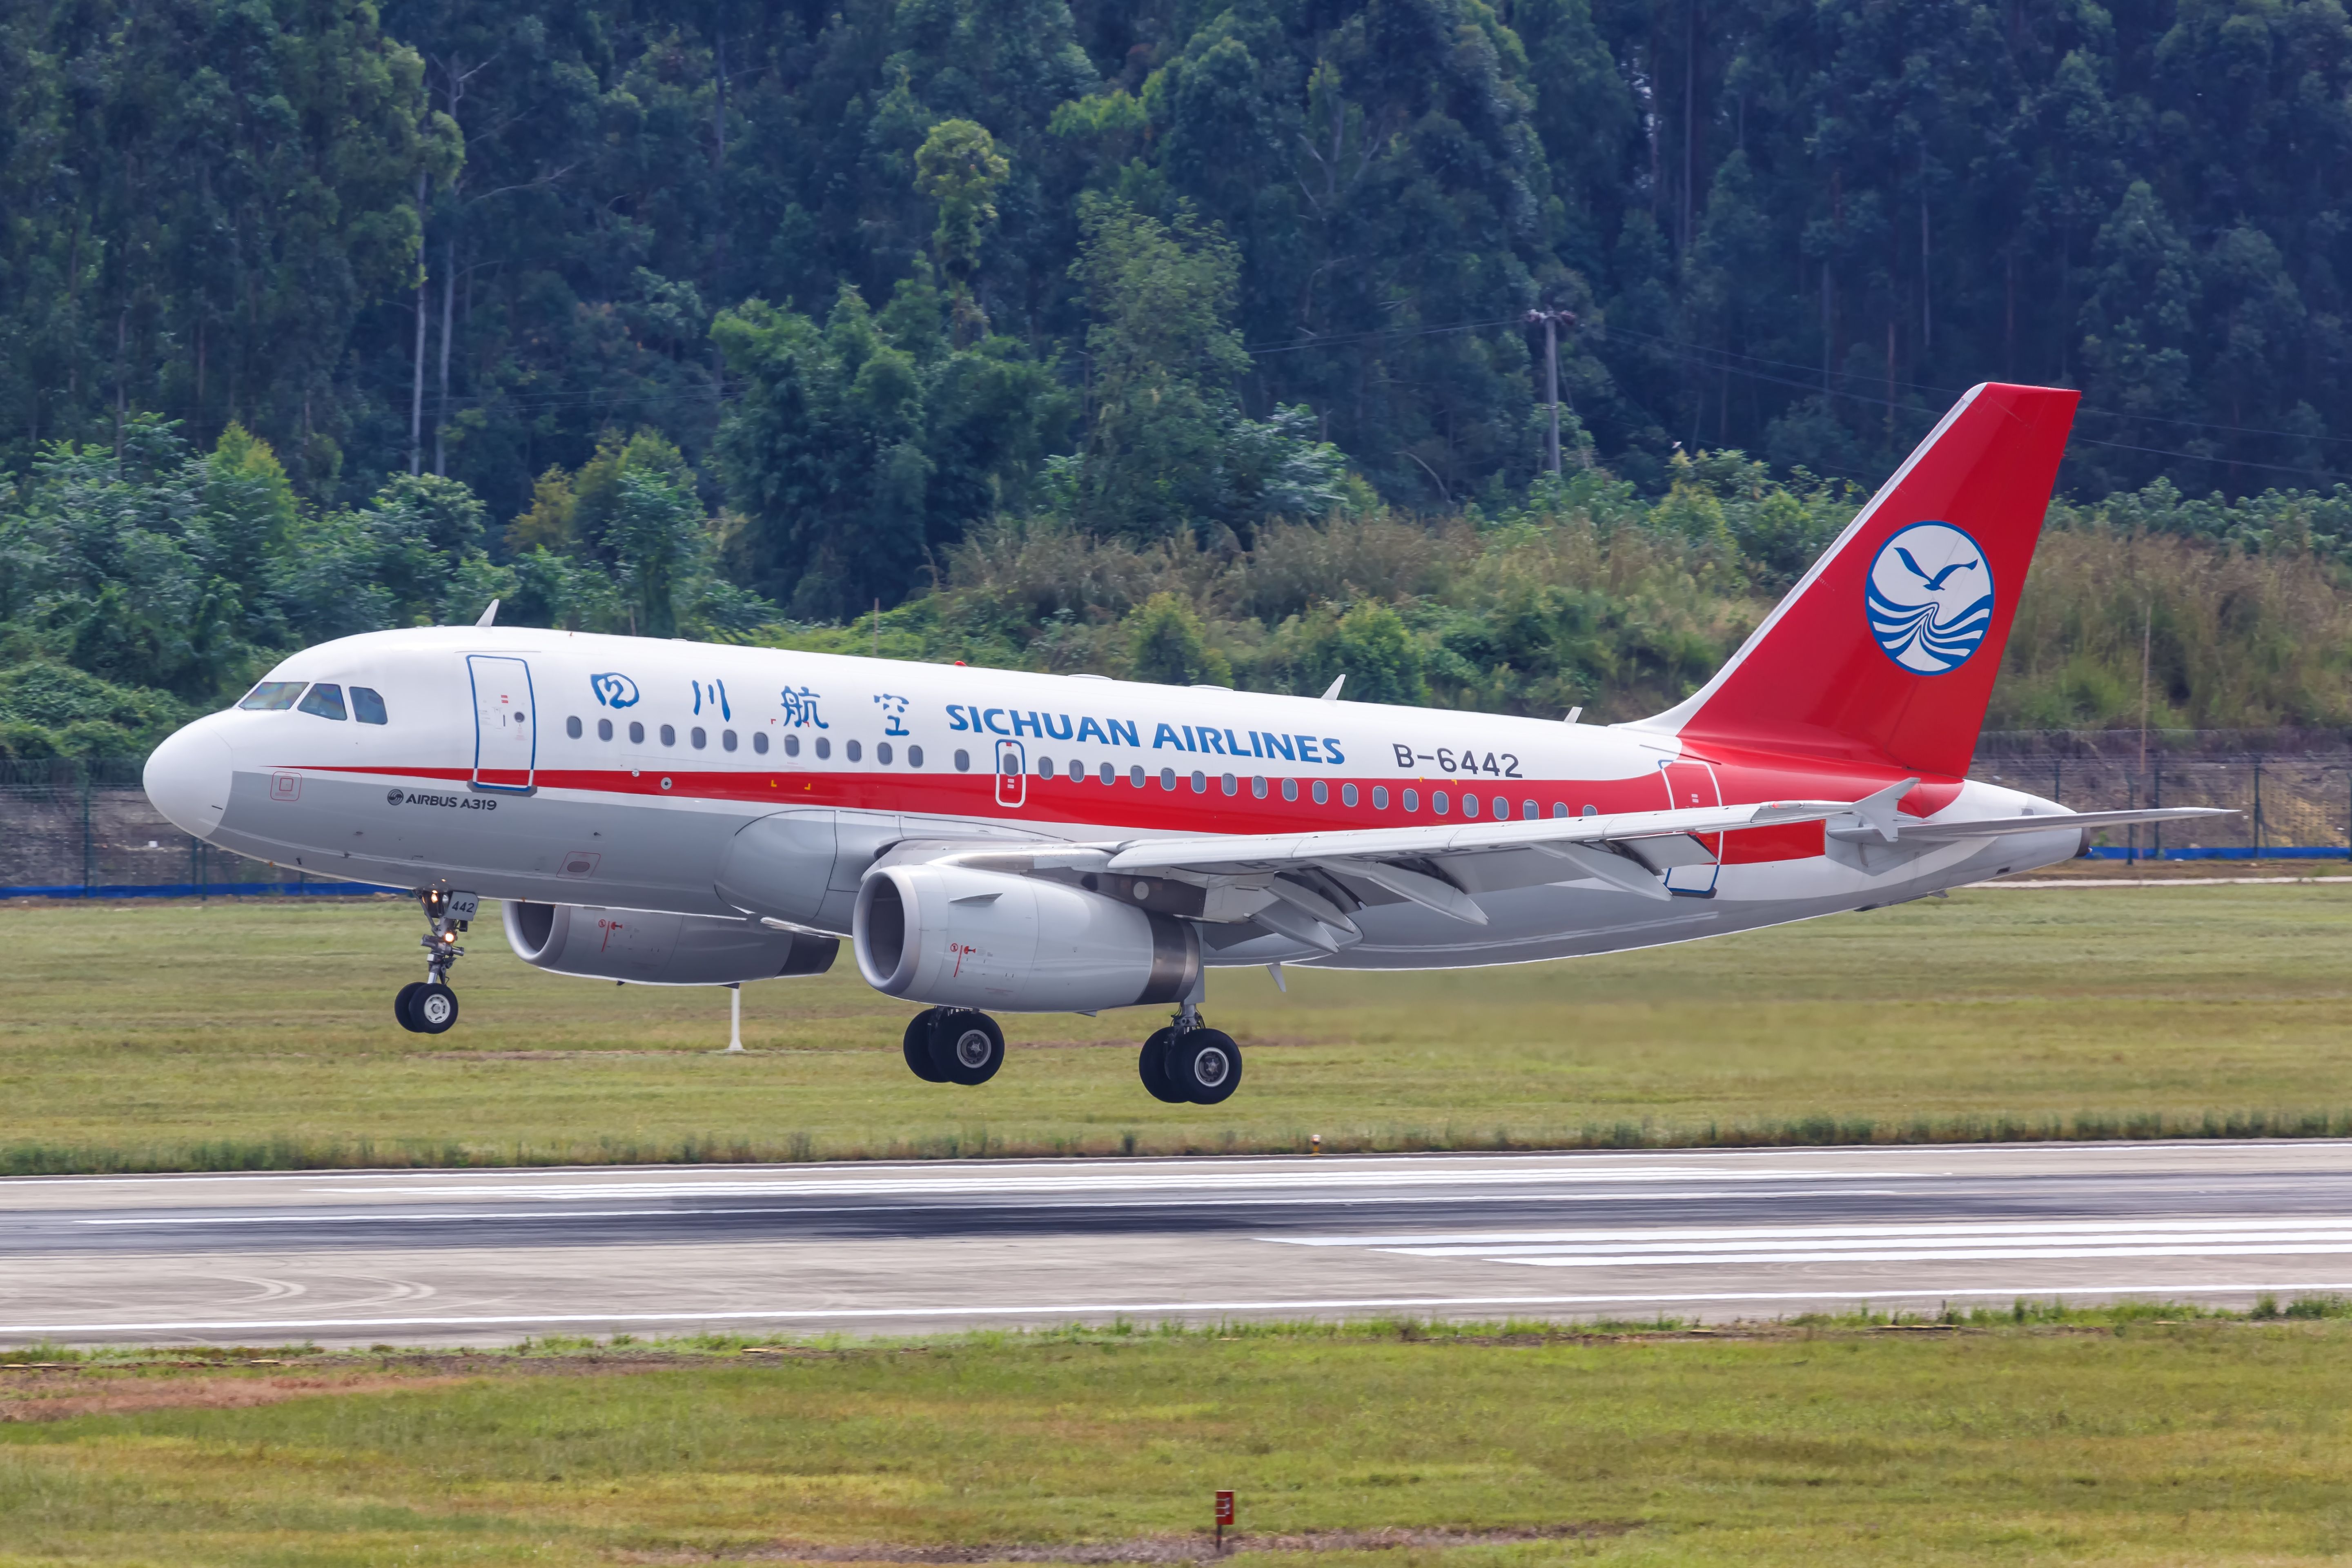 A Sichuan Airlines Airbus A319 just above a runway.